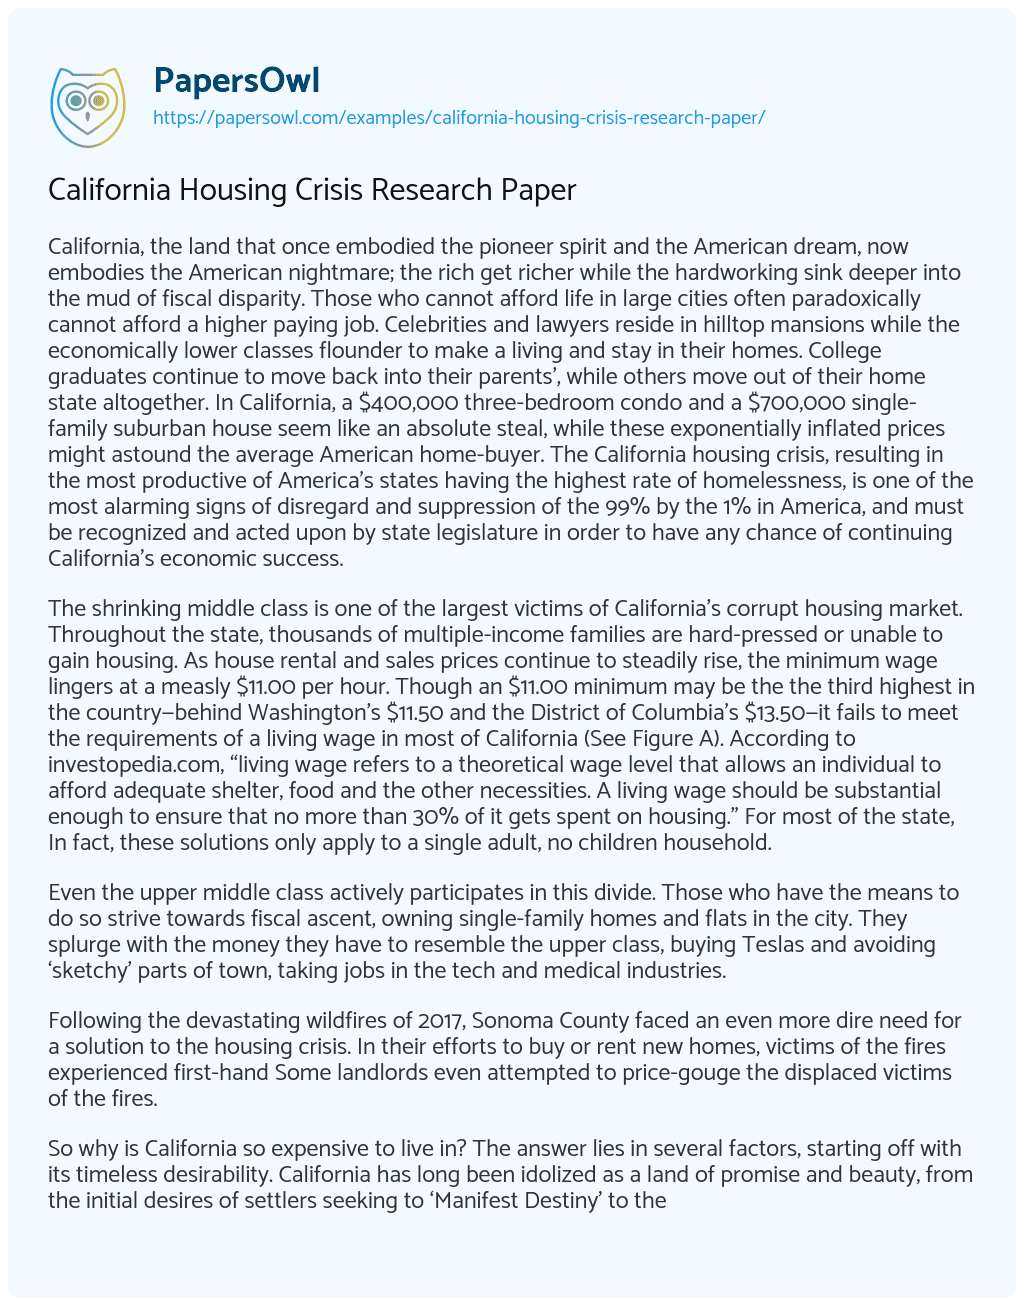 Essay on California Housing Crisis Research Paper